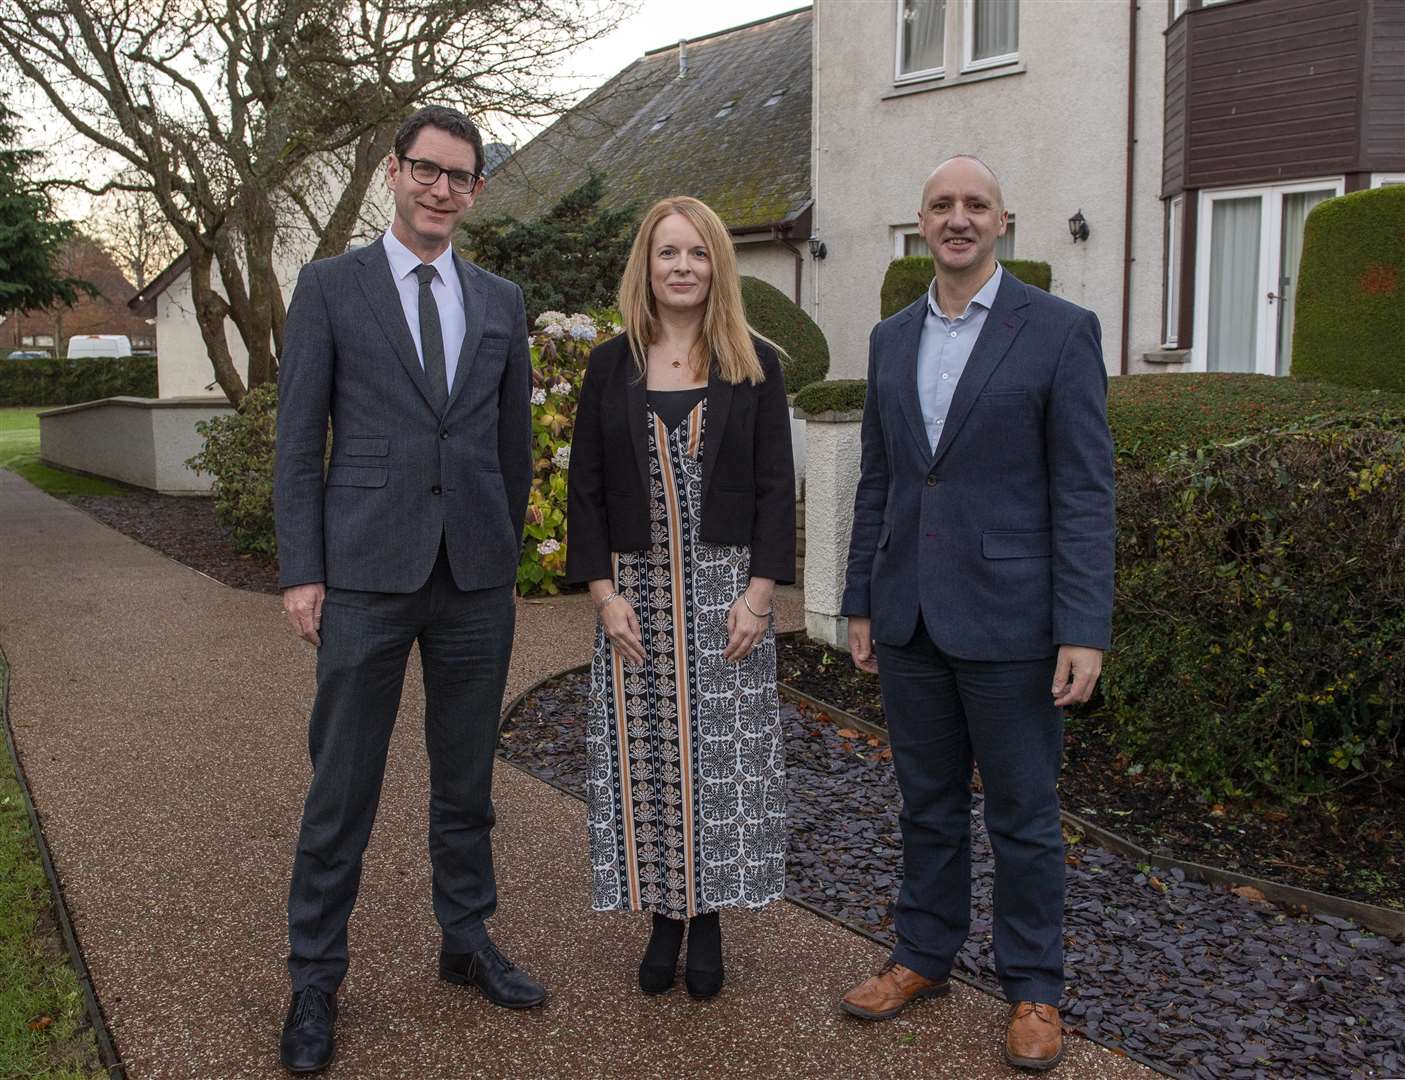 Left to right: Paddy Mathews, Head of Operations, Ireland’s Hidden Heartlands, Alison Clark, Head of Community Support and Engagement at the Highland Council and Chris Taylor, VisitScotland Regional Leadership Director. Pic. Trevor Martin